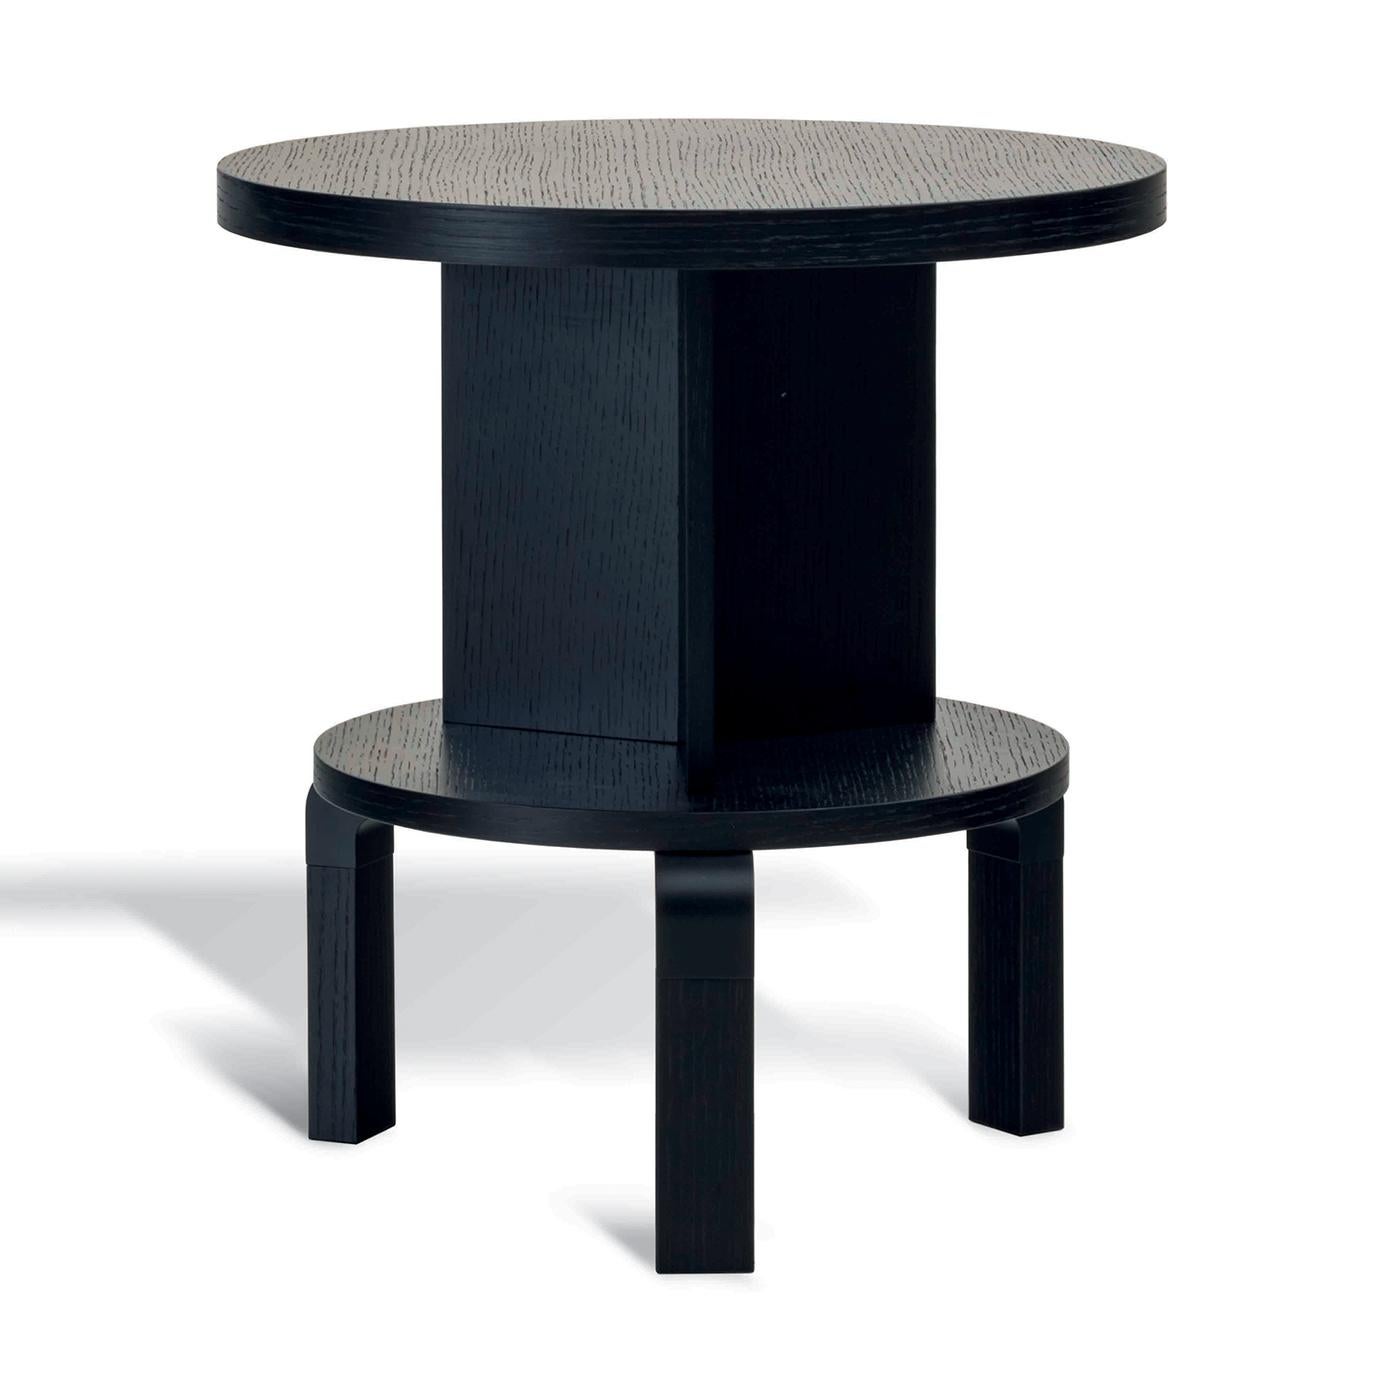 The feet, the tops and the structure of this coffee table are made of natural oak, ebonized oak or sucupira veneer. The feet also feature black painted metal inserts. This piece is a true eye-catcher thanks to its unsual two-level structure and to